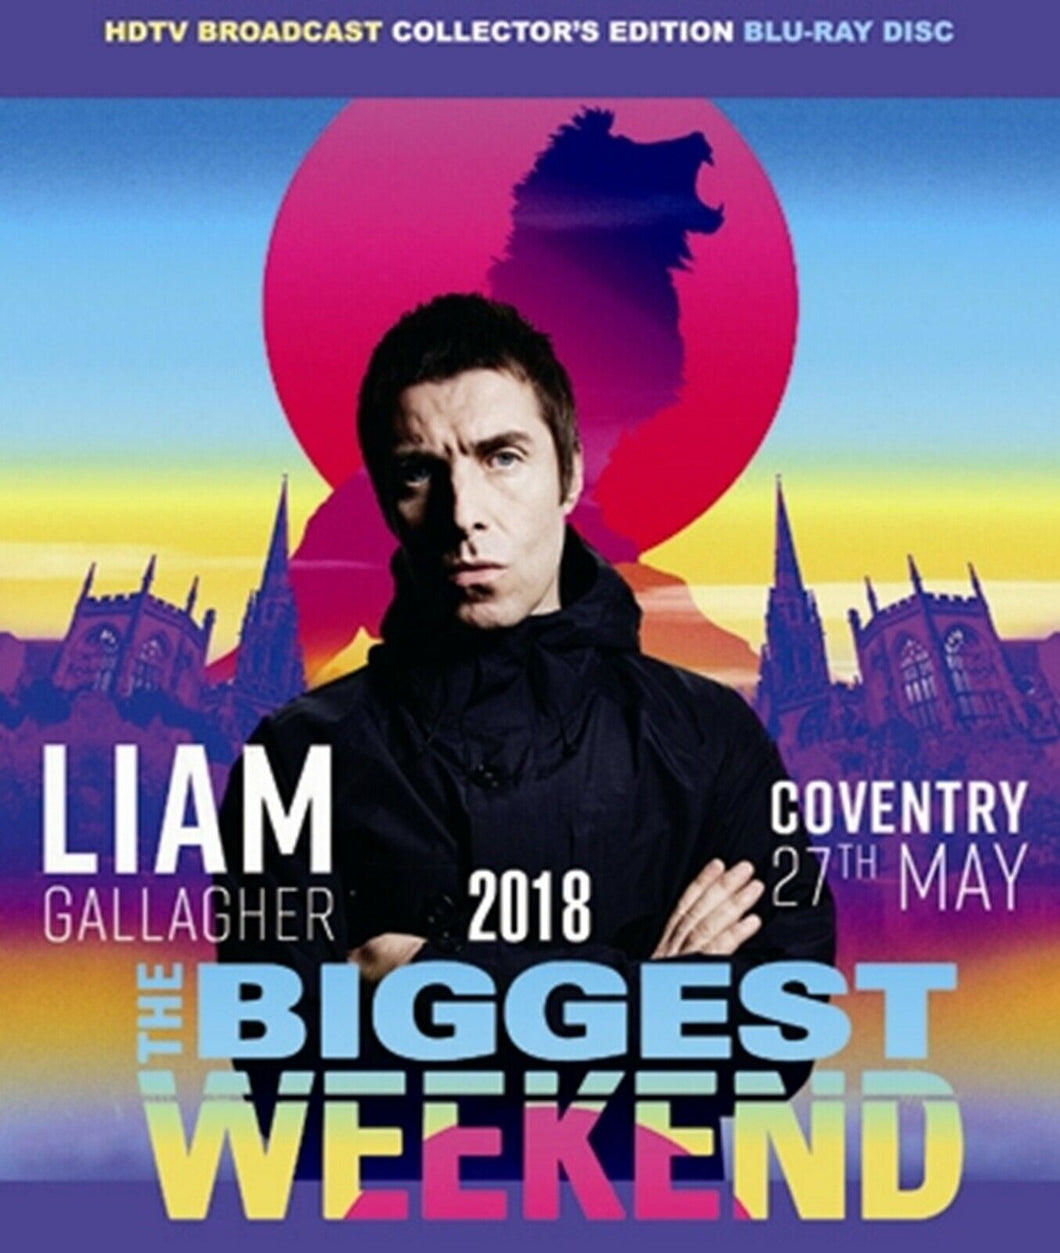 Liam Gallagher The Biggest Weekend 2018 Blu-ray 1 Disc 16 Tracks Rock Music F/S